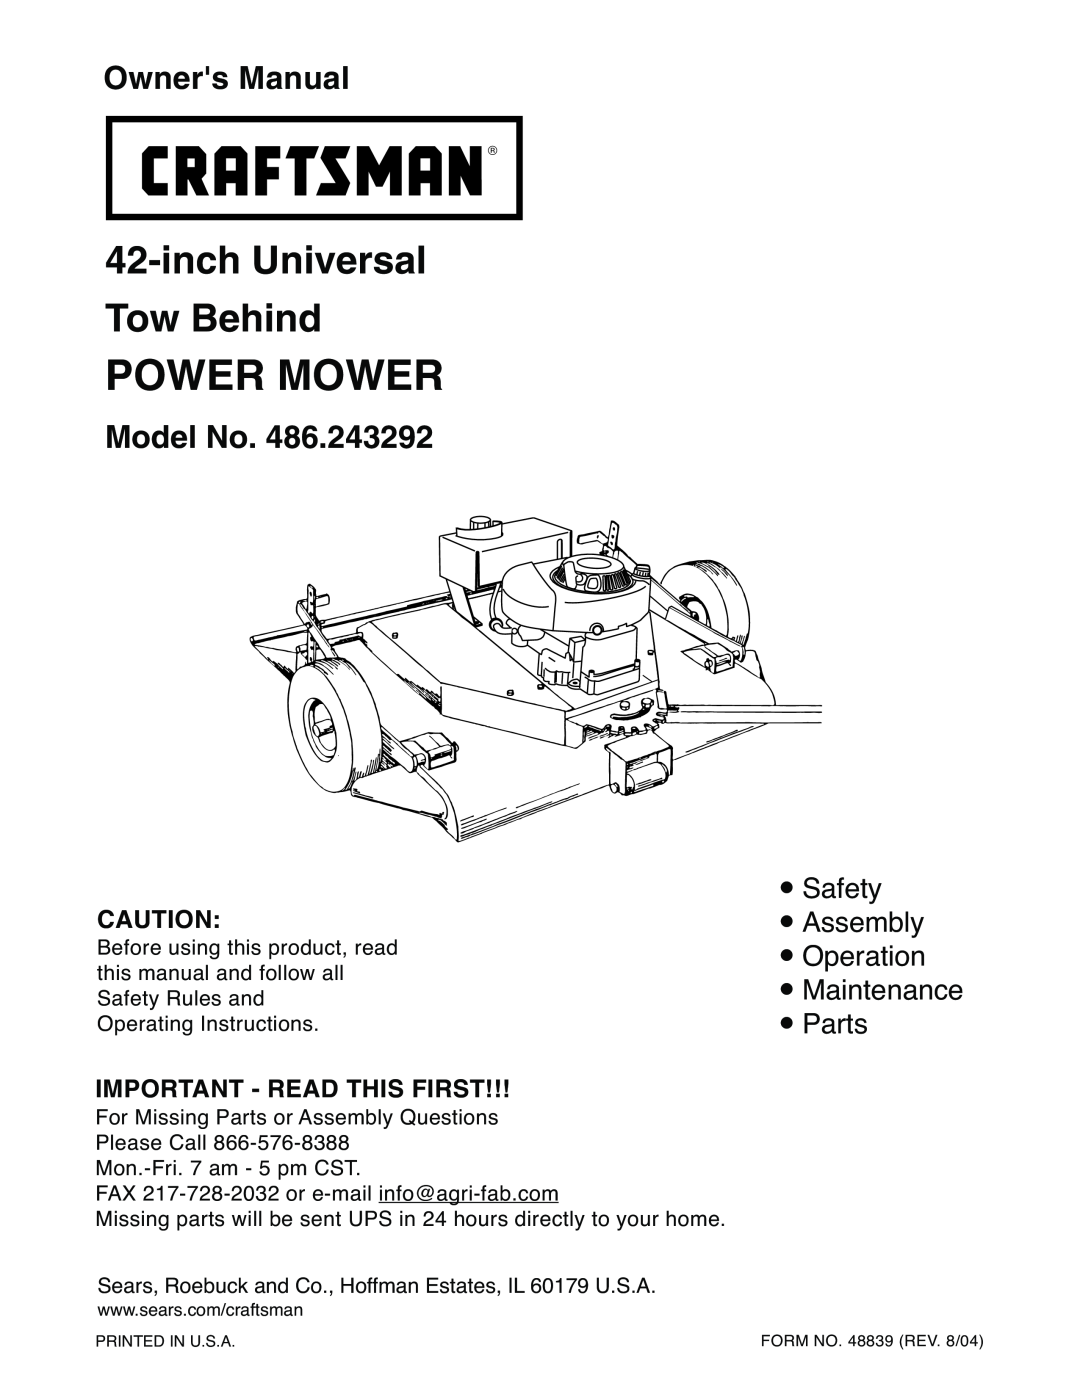 Craftsman 486.243292 owner manual Power Mower, Important - Read This First, inch Universal Tow Behind, Model No 